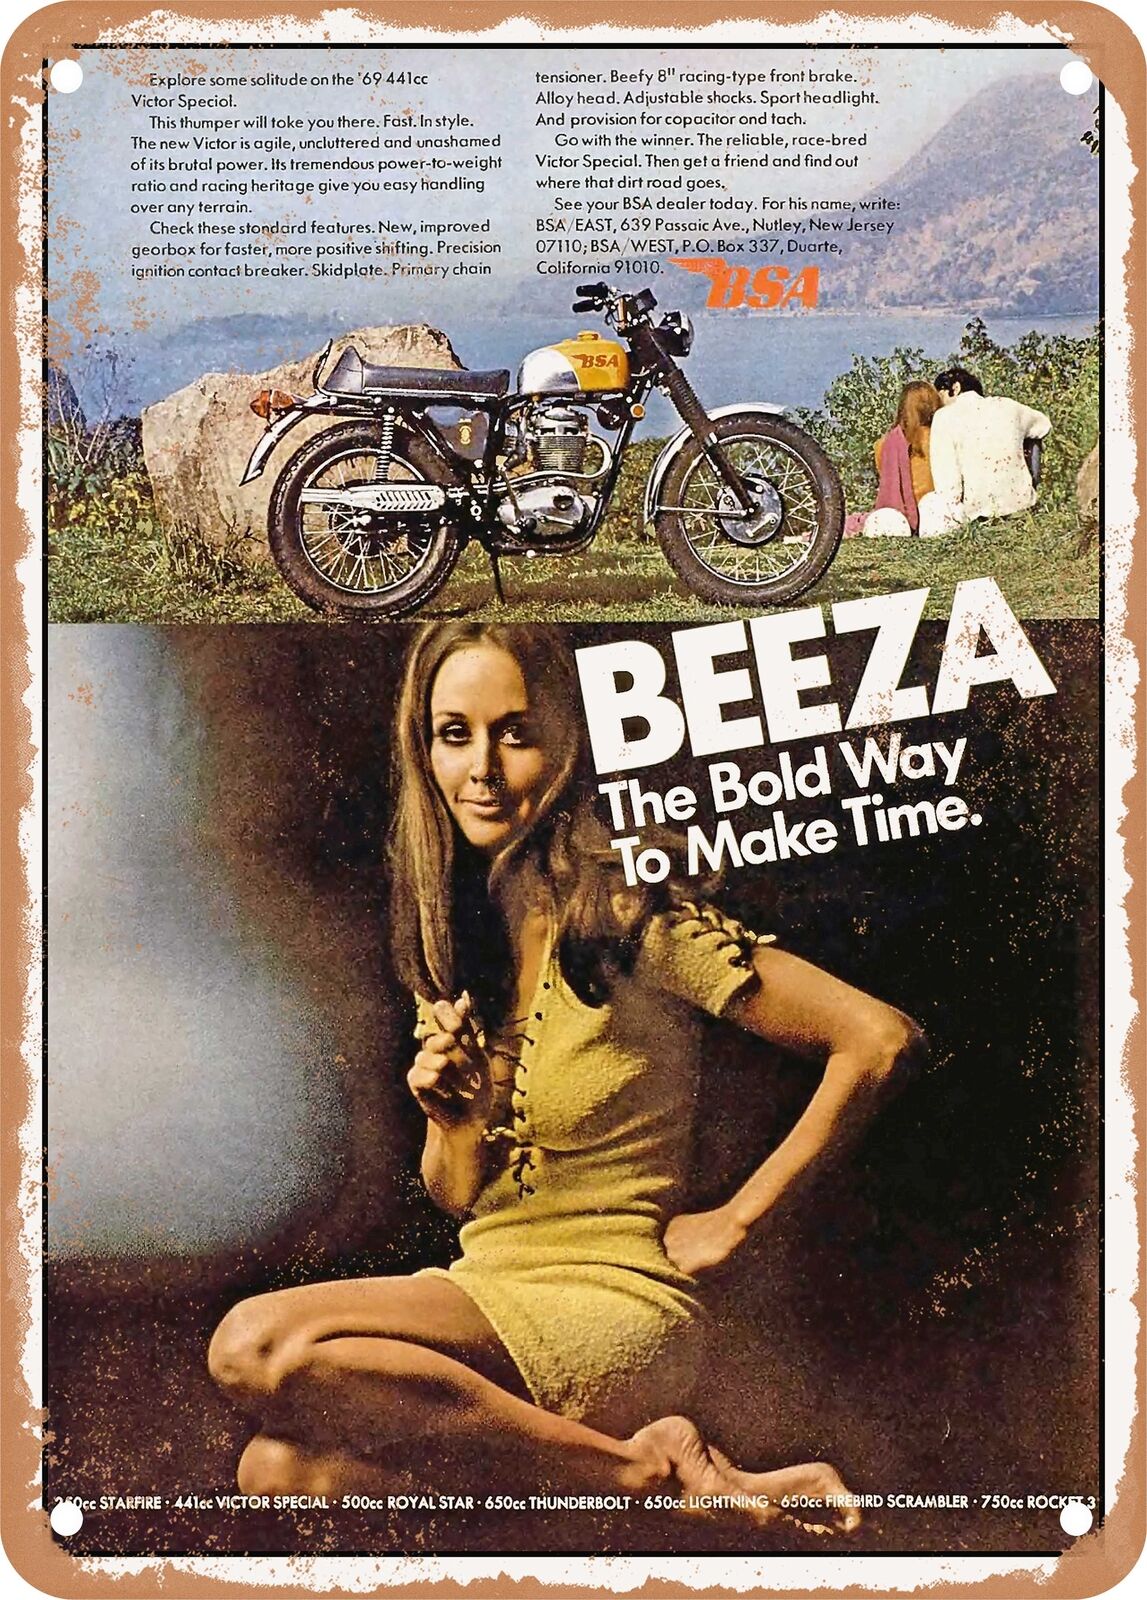 METAL SIGN - 1969 BSA 441cc Victor Special Beeza the Bold Way to Make Time